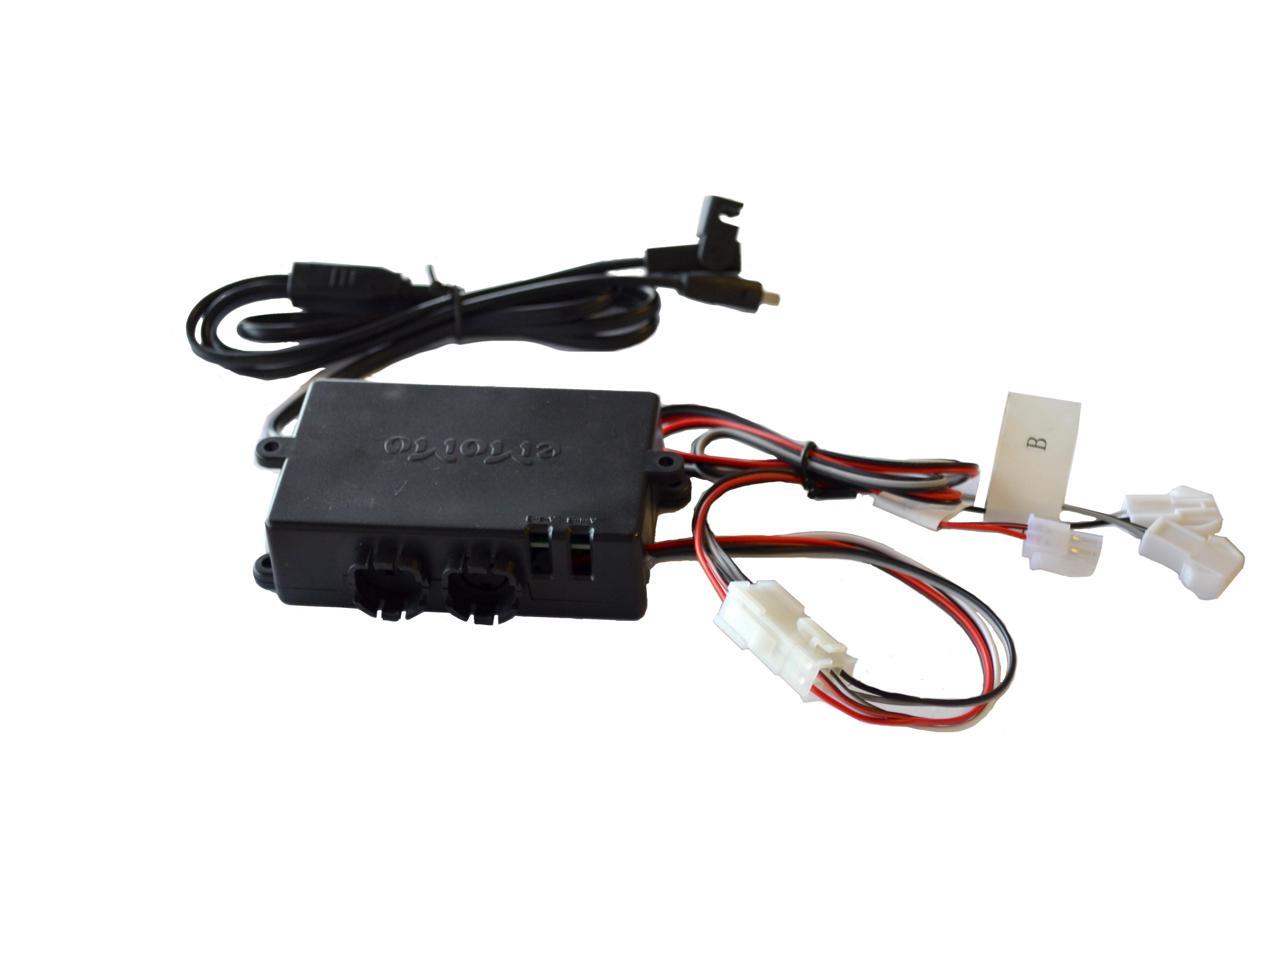 Emomo Junction Box For Recliners And Couches With Heat And Massage Newegg Com